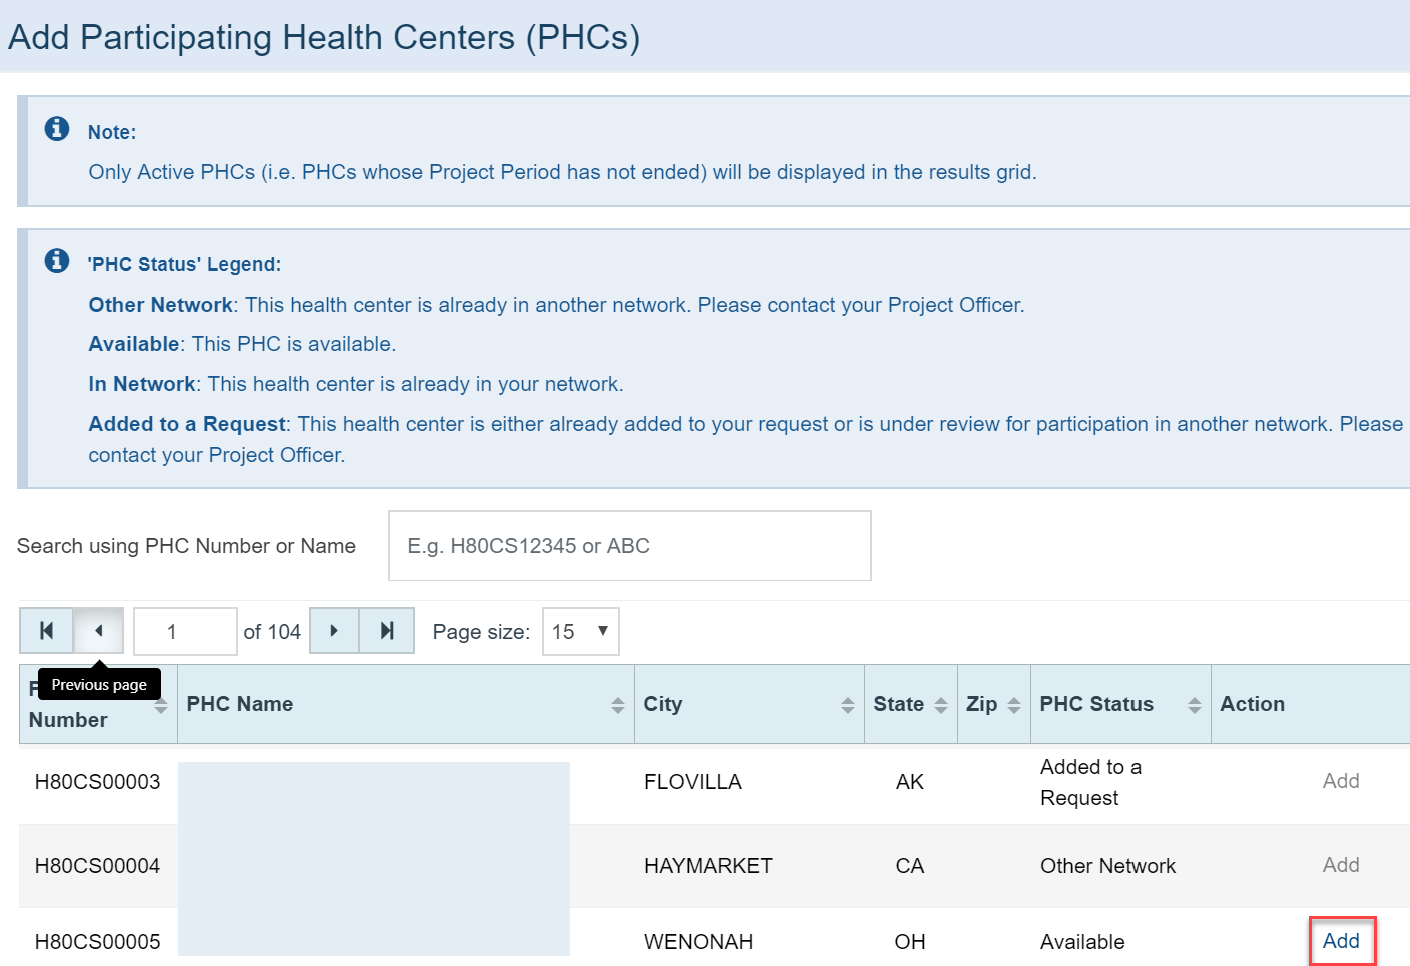 Screenshot of Add PHC page with the list of PHCs